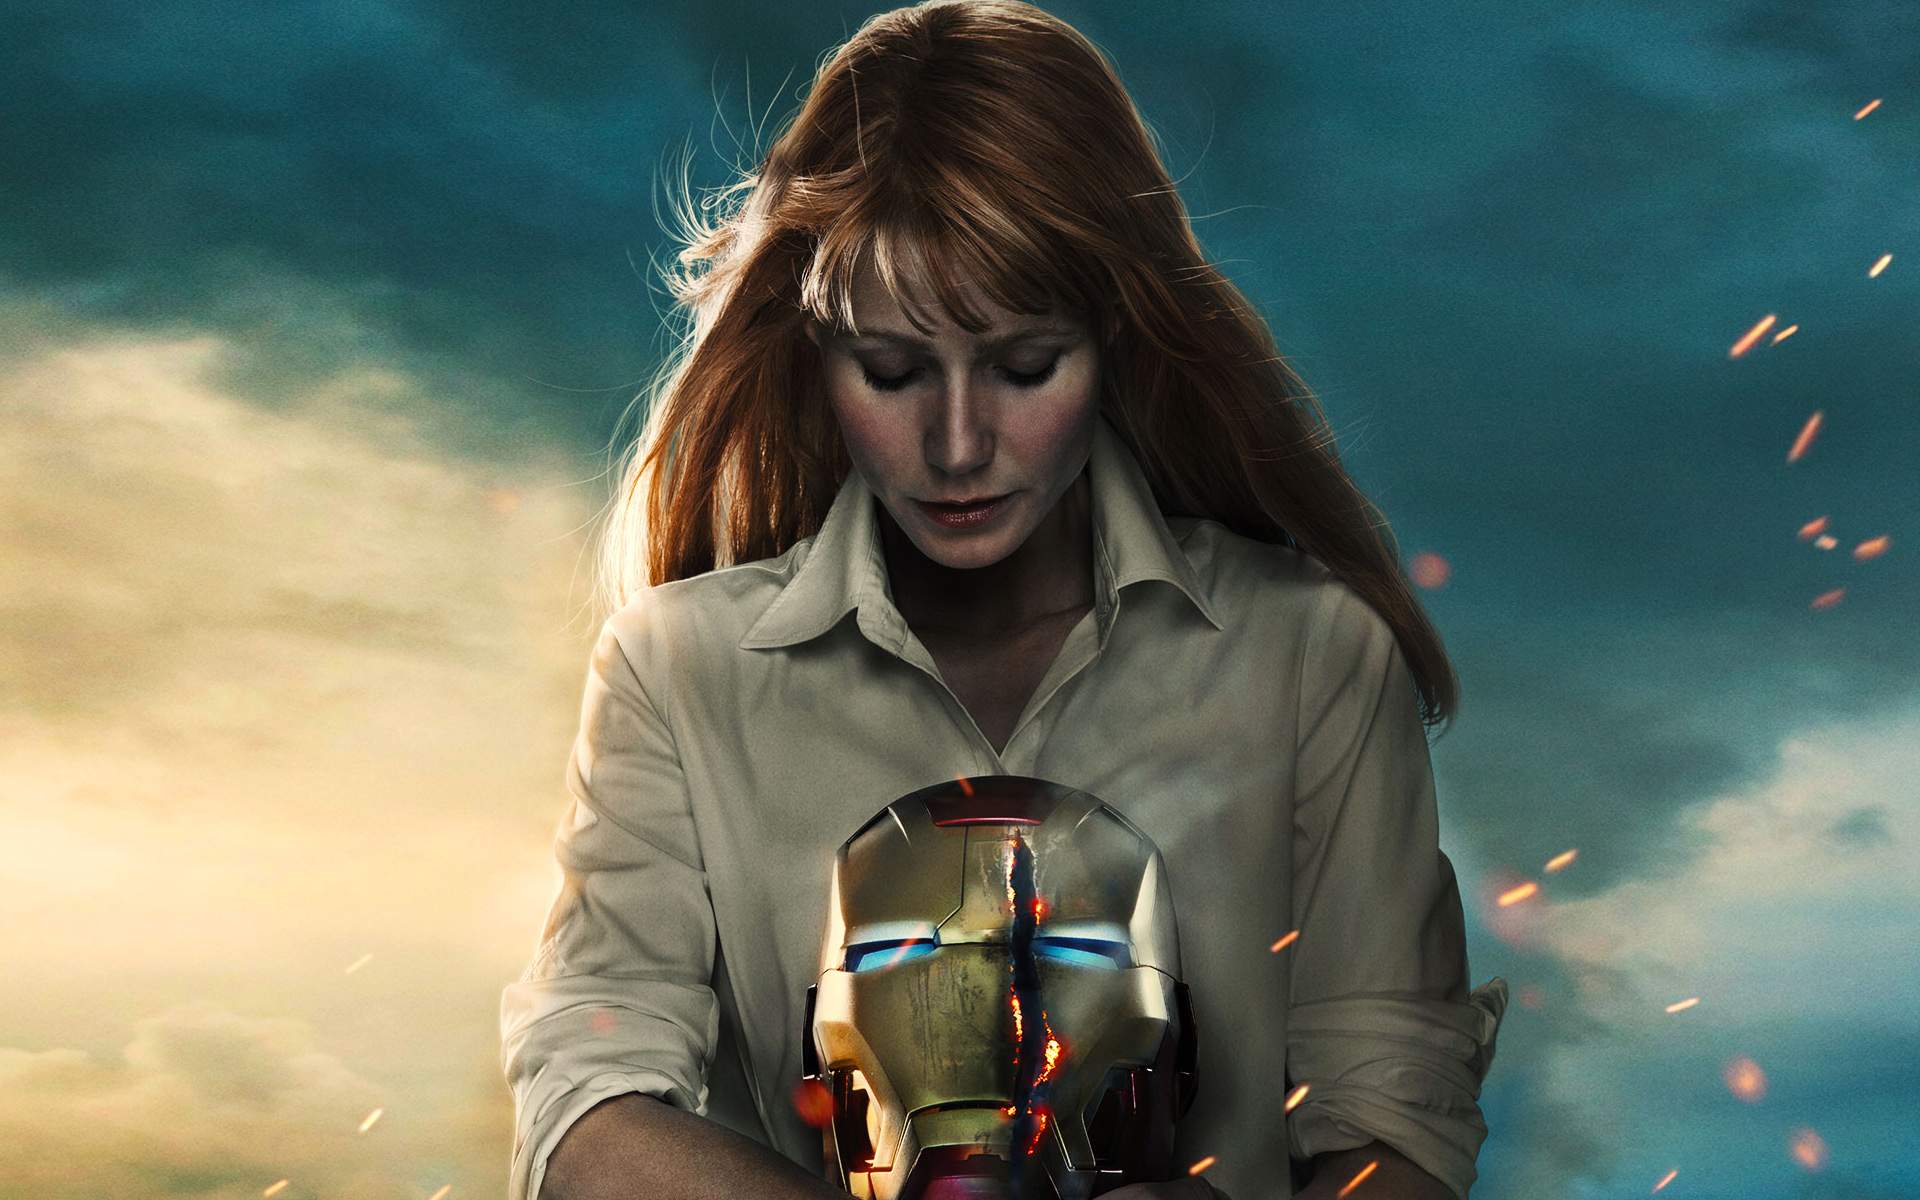 Gwyneth Paltrow to stop playing Pepper Potts after Avengers: Endgame- Cinema express